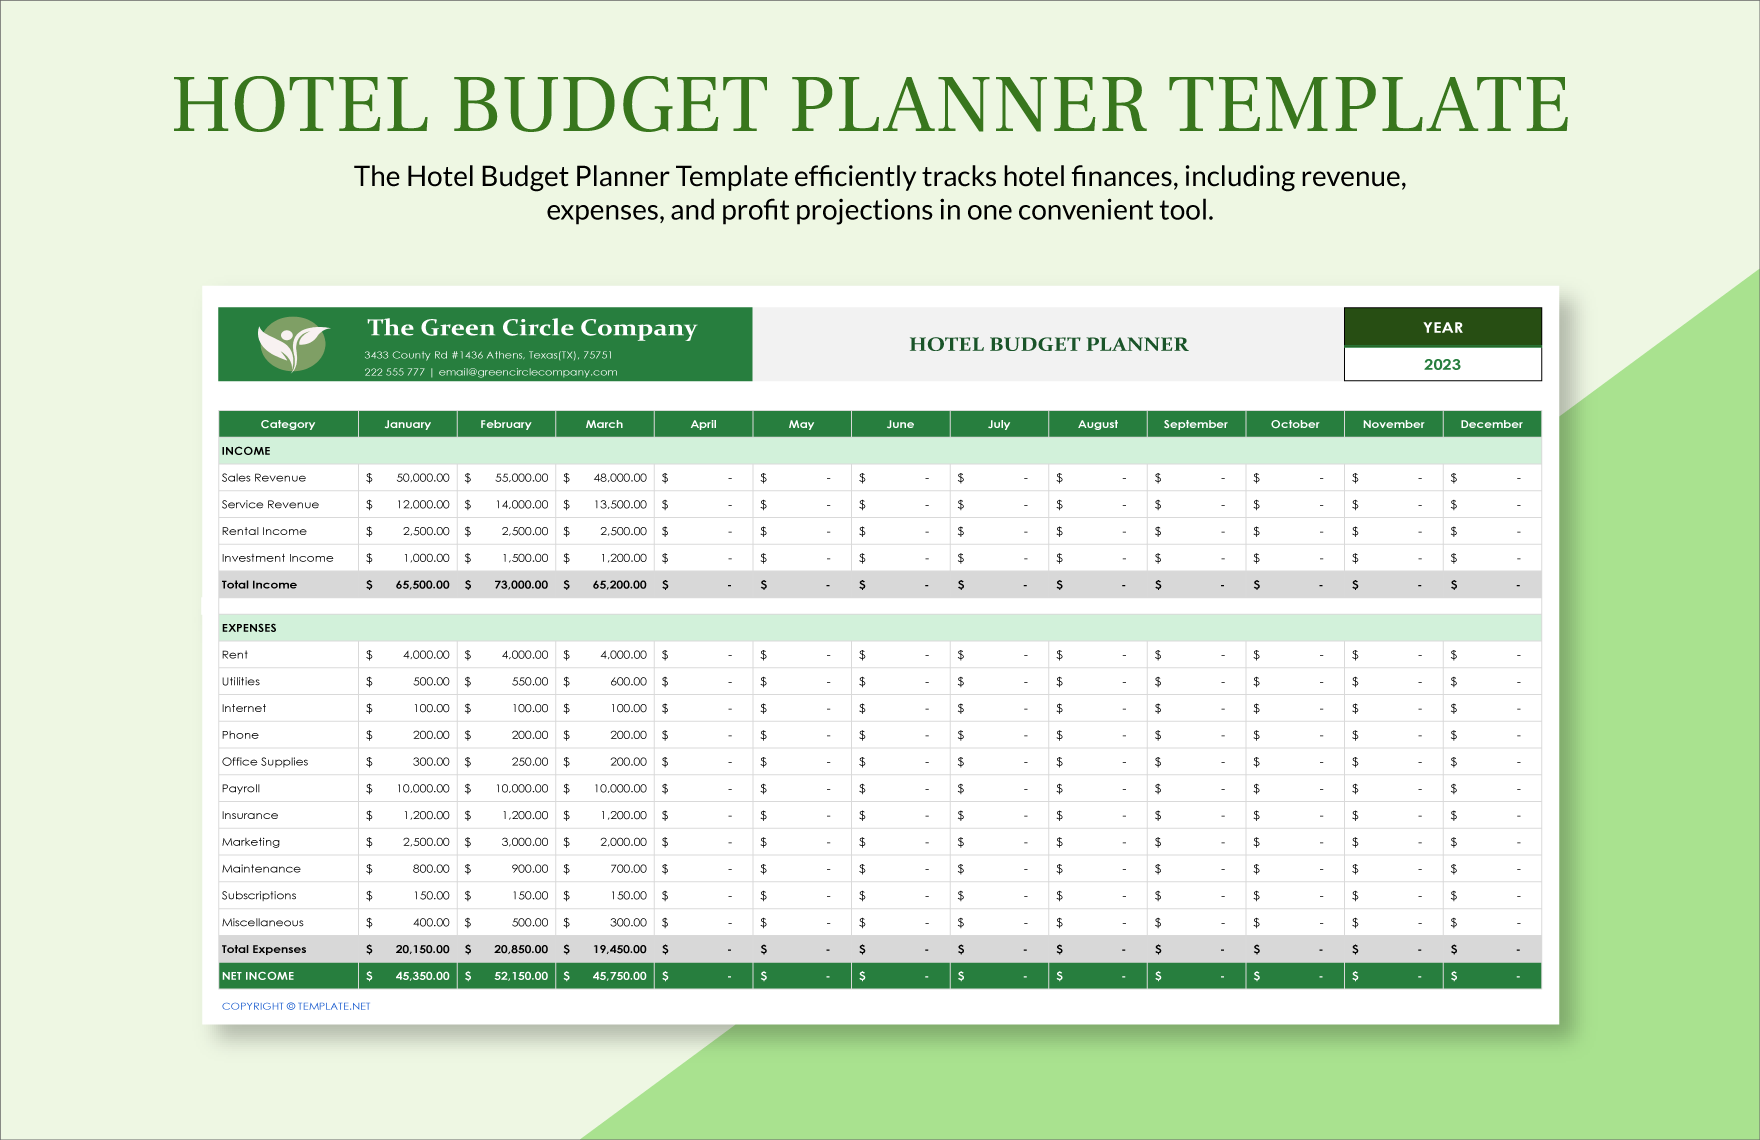 Hotel Budget Planner Template Download in Word, Google Docs, Excel